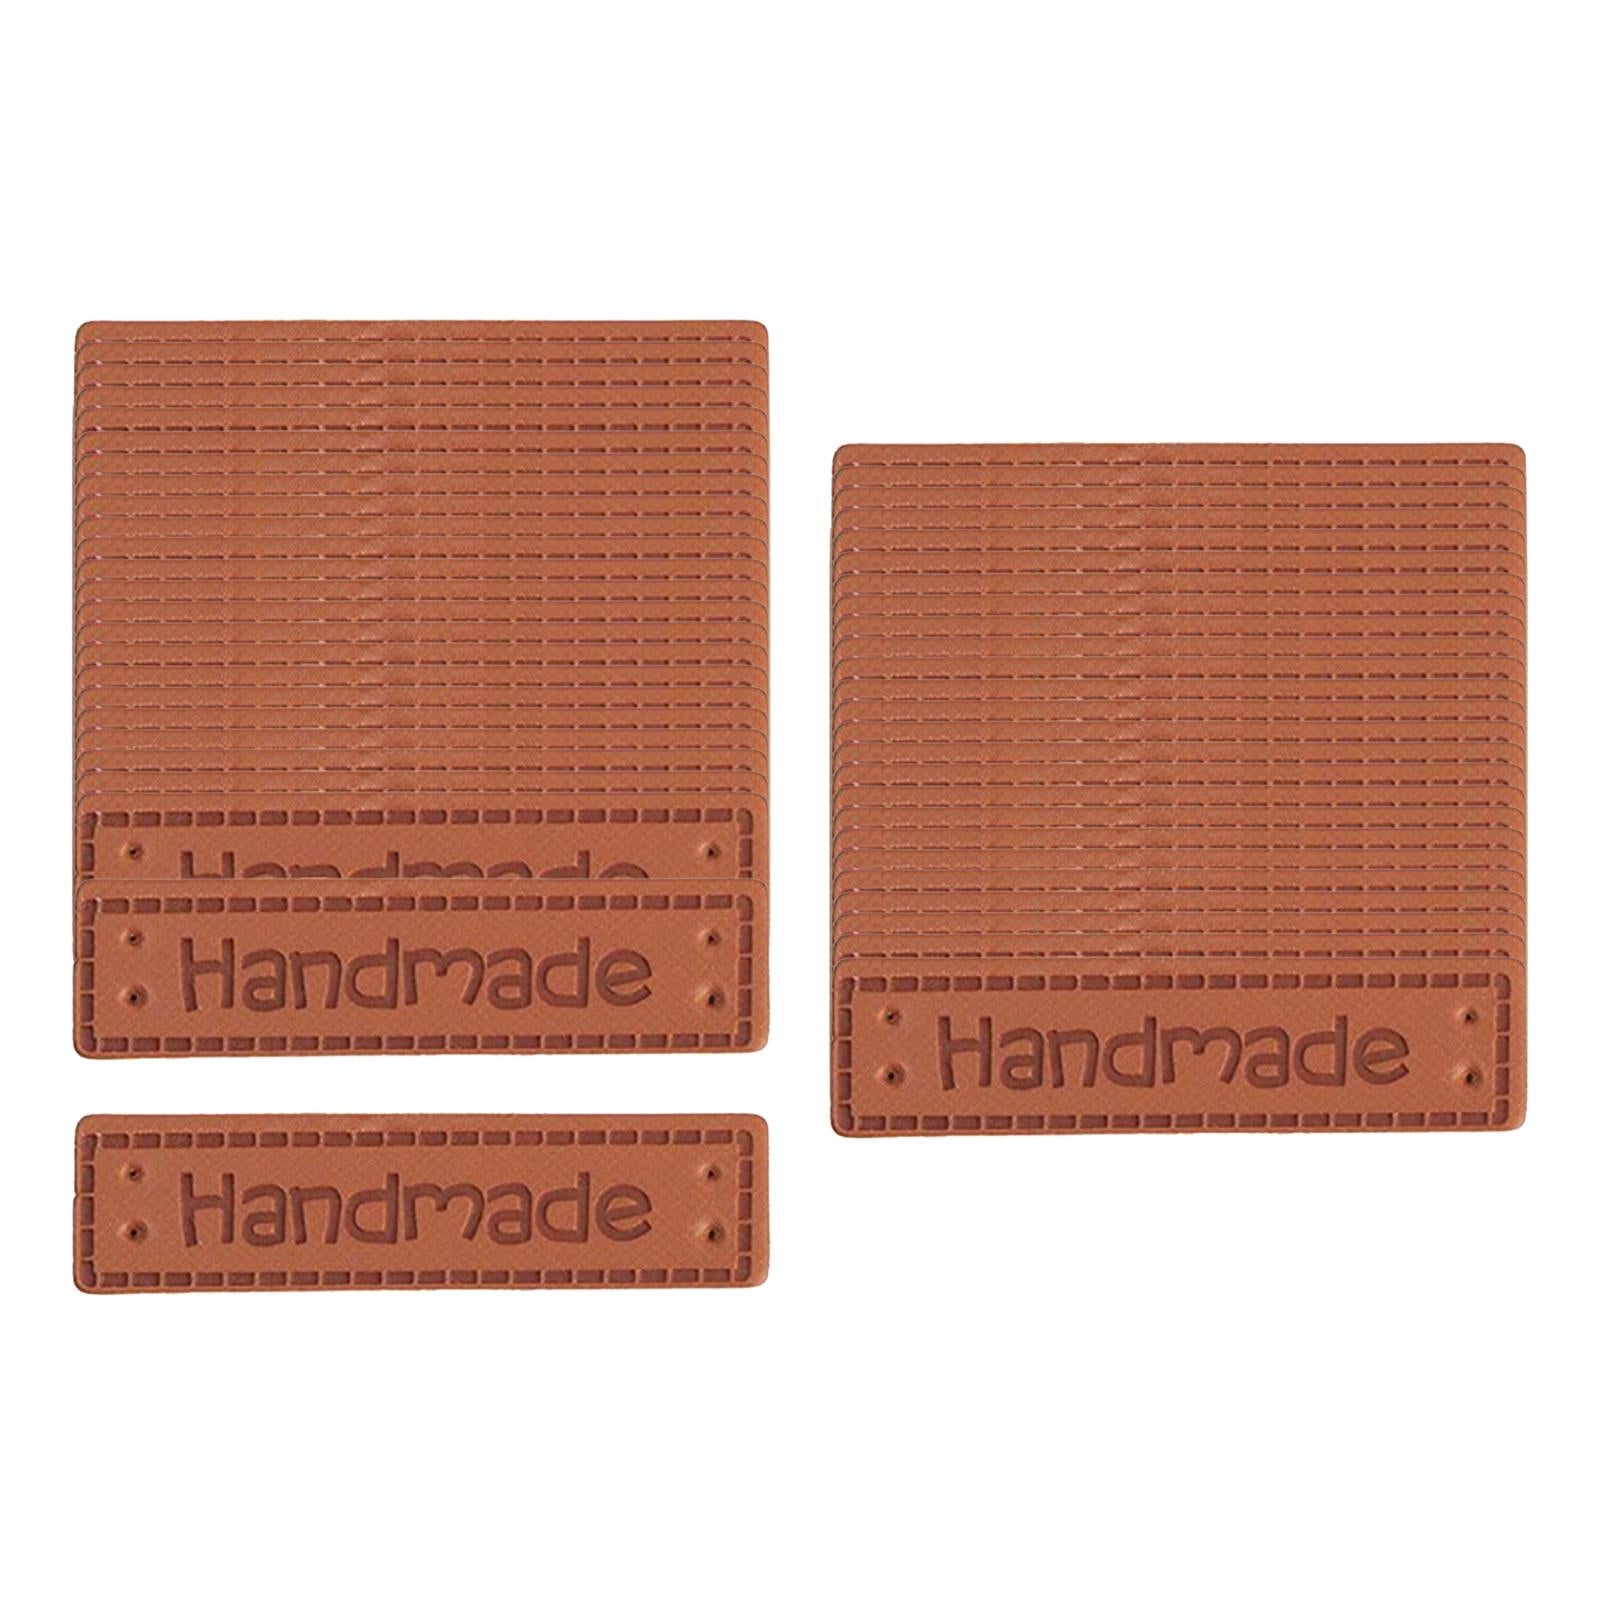 50 Pieces Handmade Labels Embossed Tag Leather Tags for Sewing Accessories